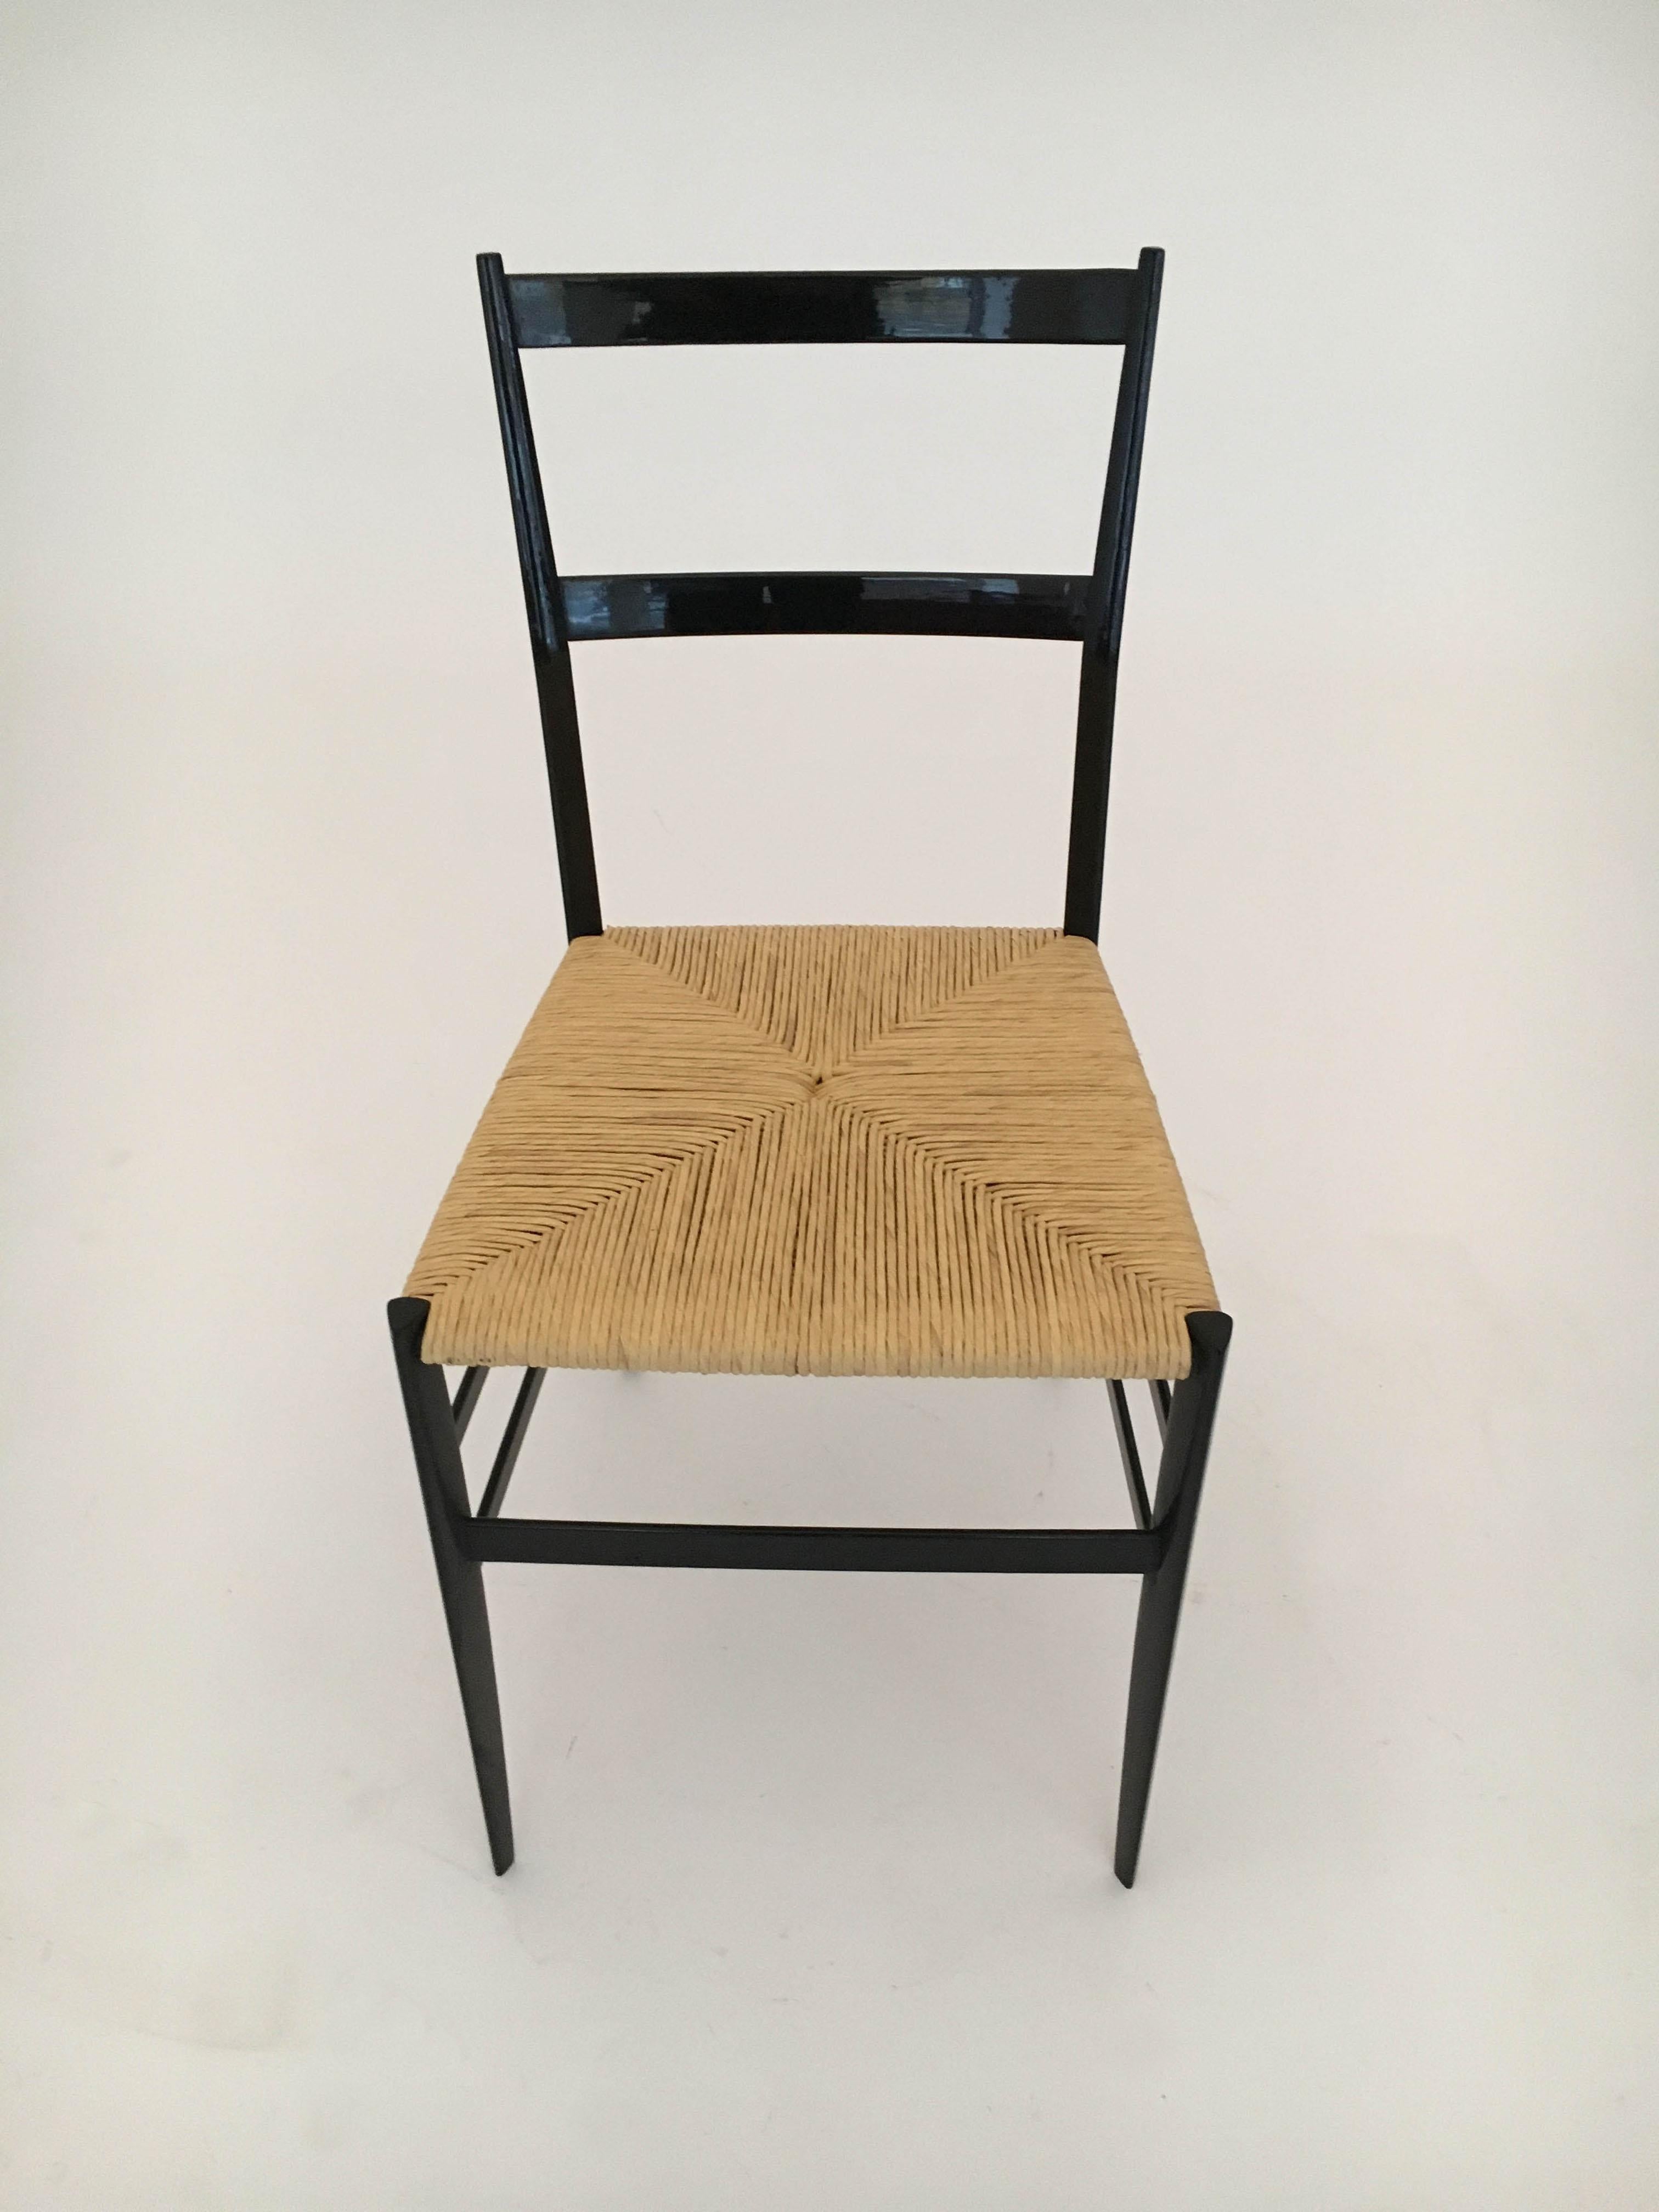 Gio Ponti Vintage Superleggera Set of Six Dining Chairs Cassina, Italy, 1958 In Good Condition For Sale In Vienna, Vienna